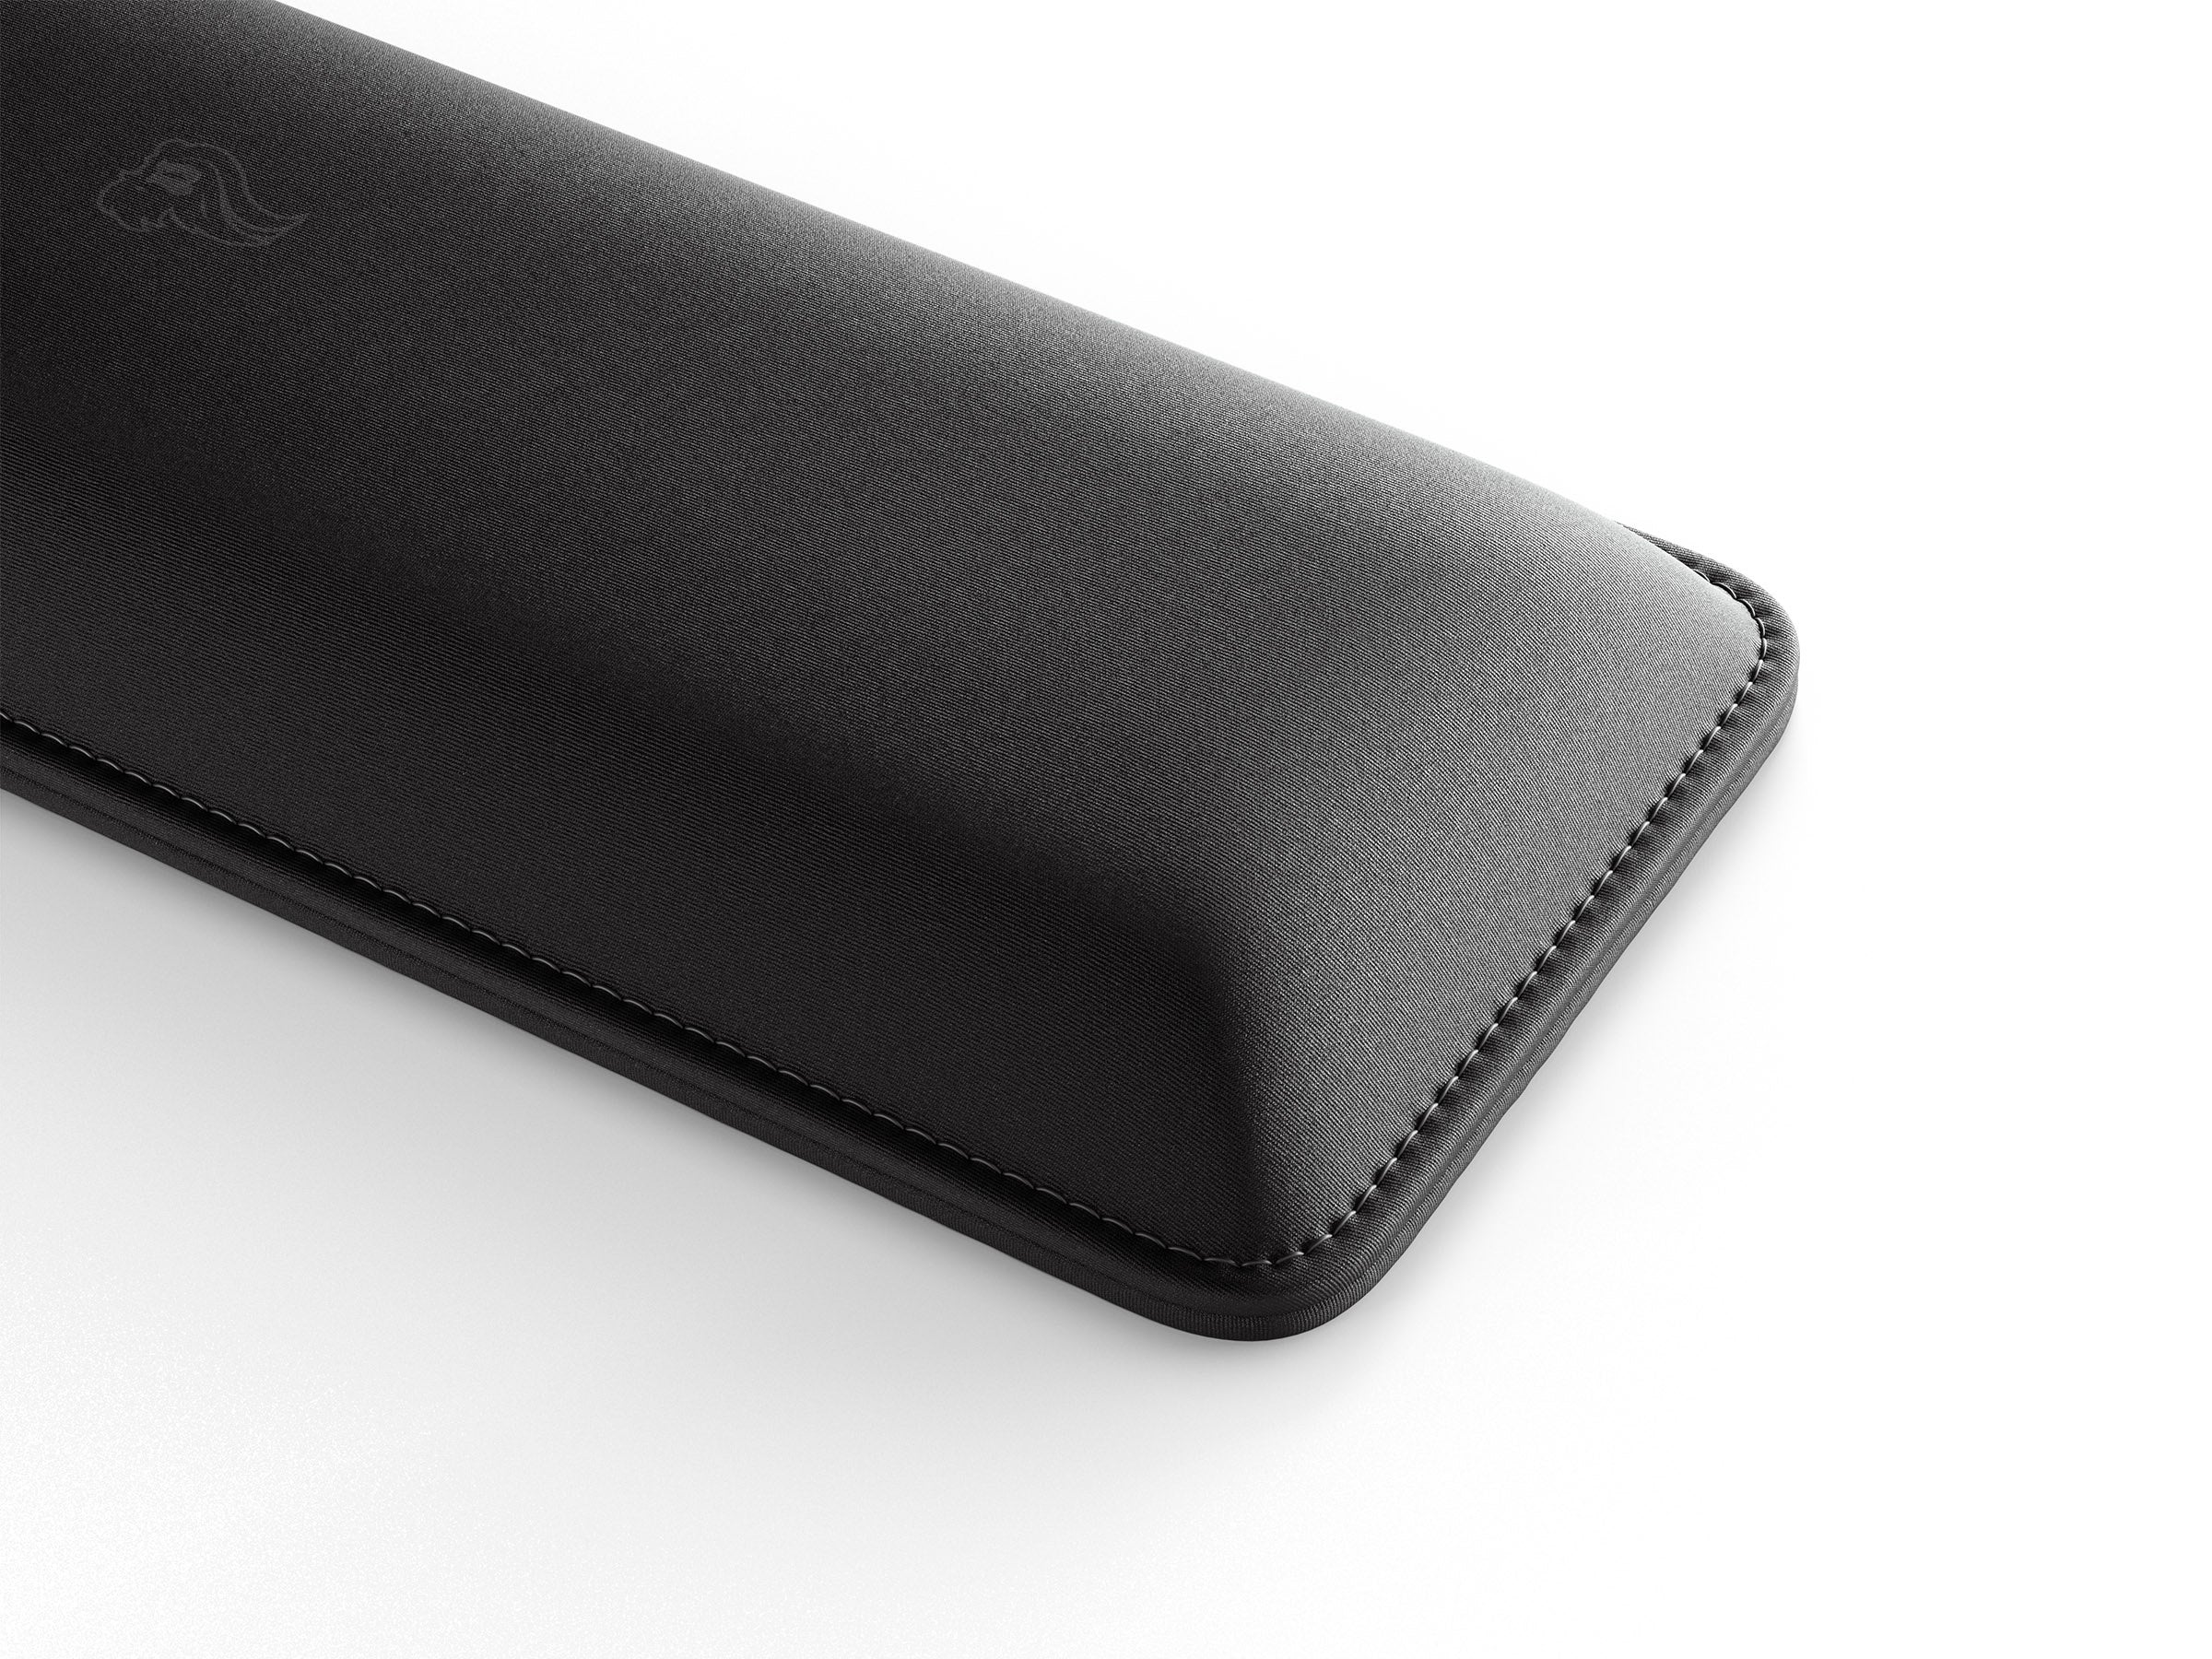 Glorious PC Compact Stealth Padded Wrist Rest Black MKMO5CM9N1 |27438|